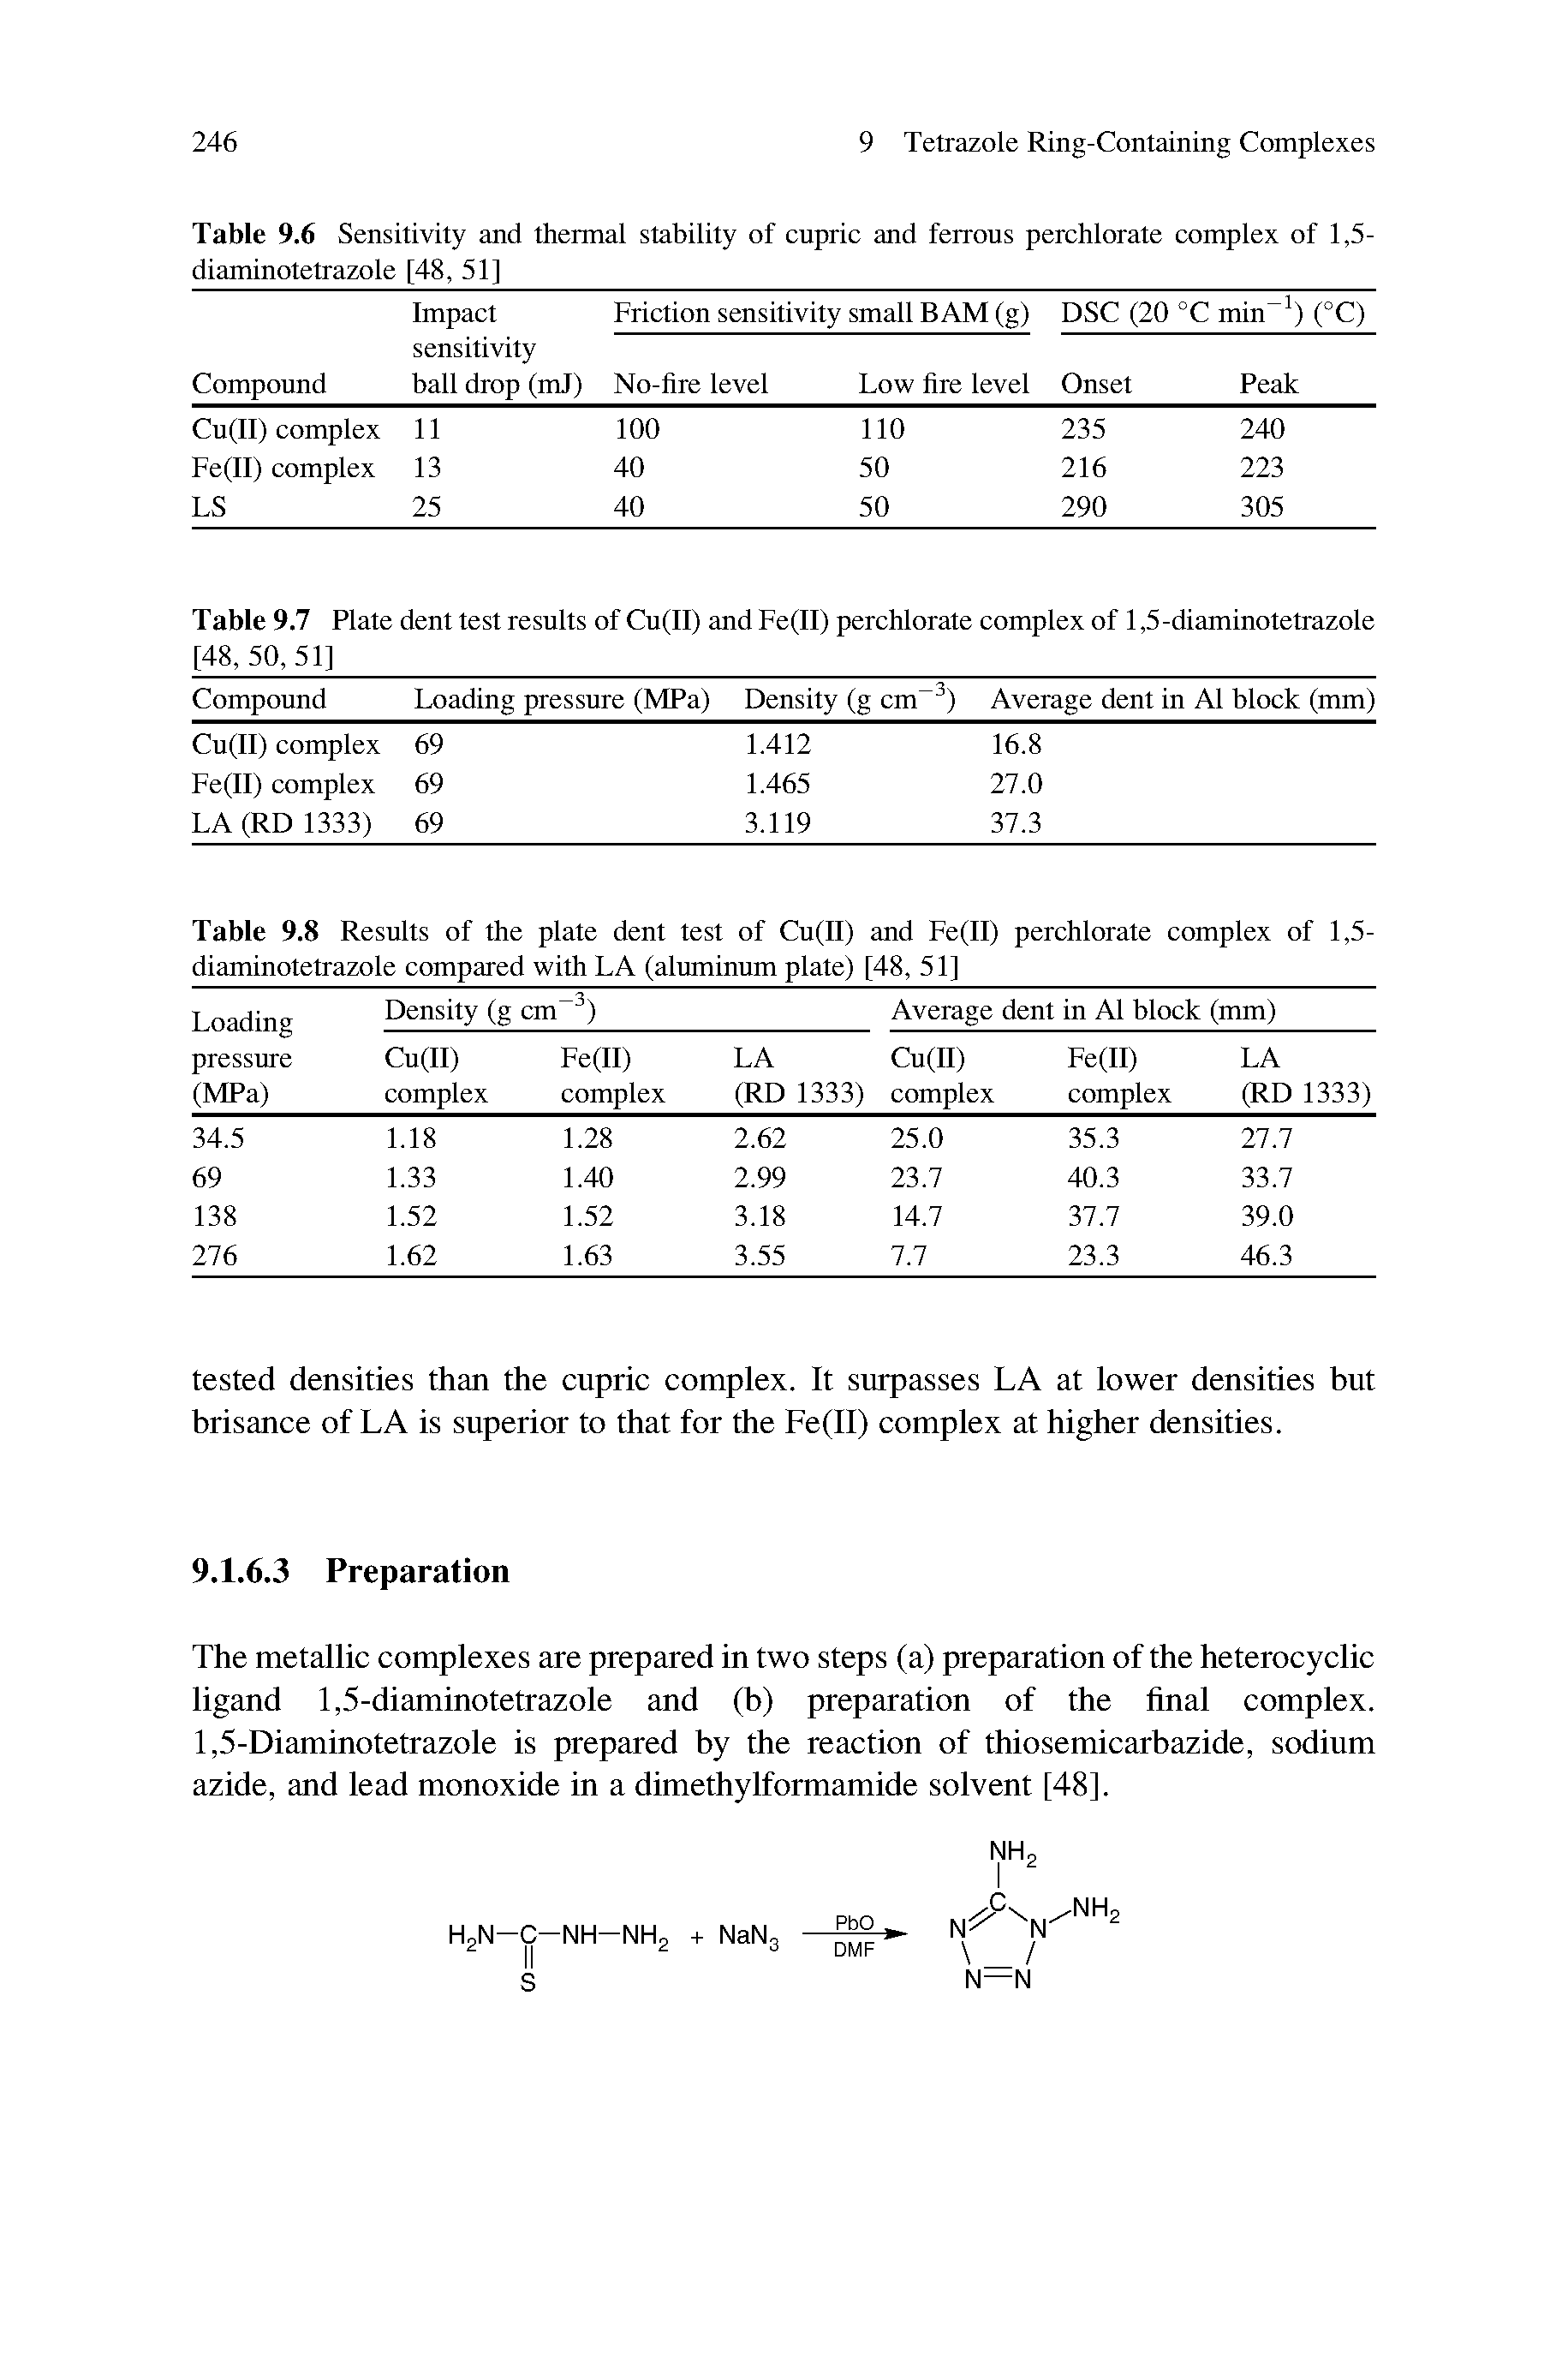 Table 9.6 Sensitivity and thermal stability of cupric and ferrous perchlorate complex of 1,5-diaminotetrazole [48, 51]...